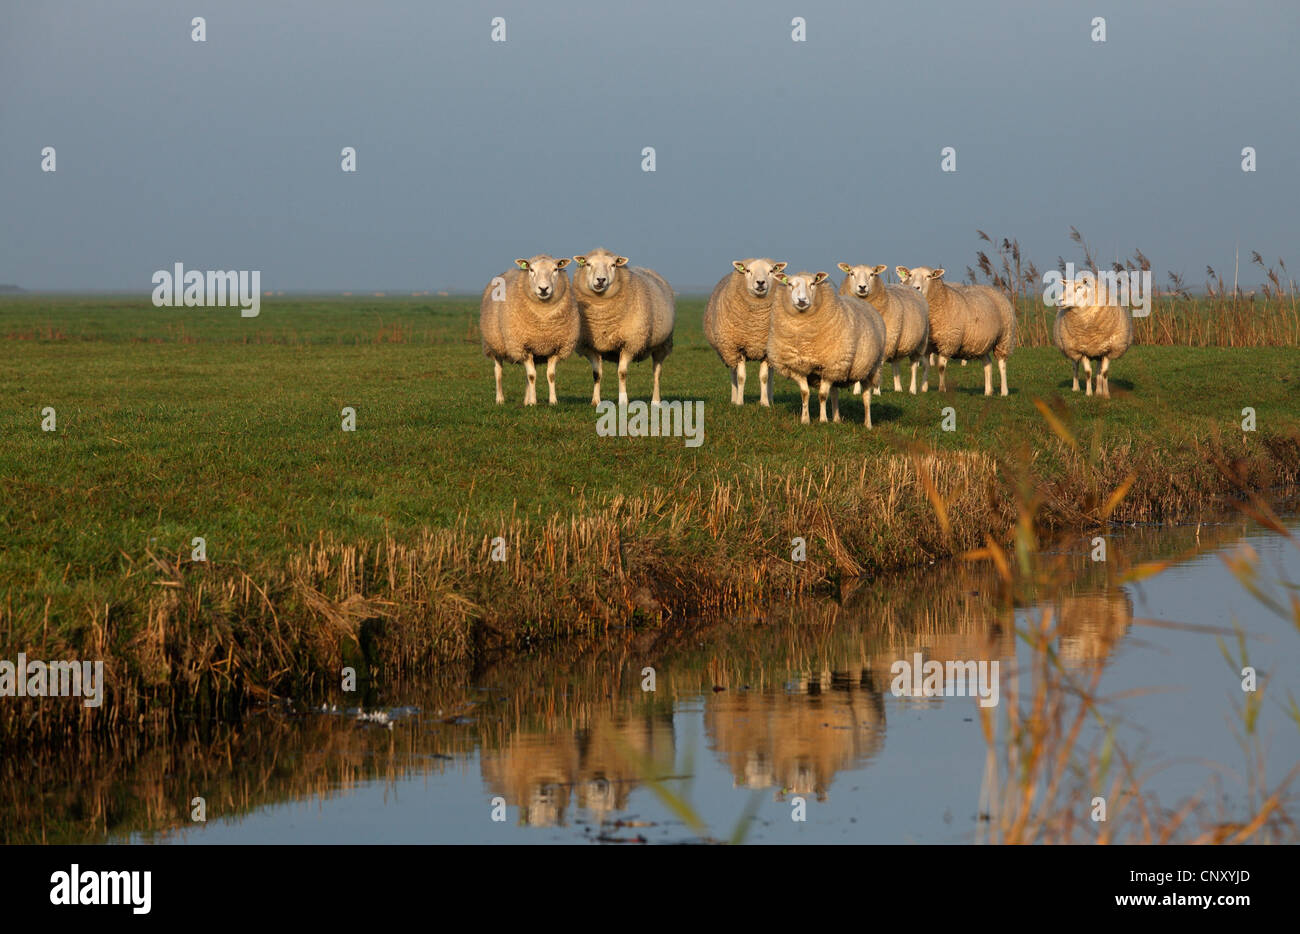 Texel sheep (Ovis ammon f. aries), group standing on pasture, Netherlands, Frisia Stock Photo